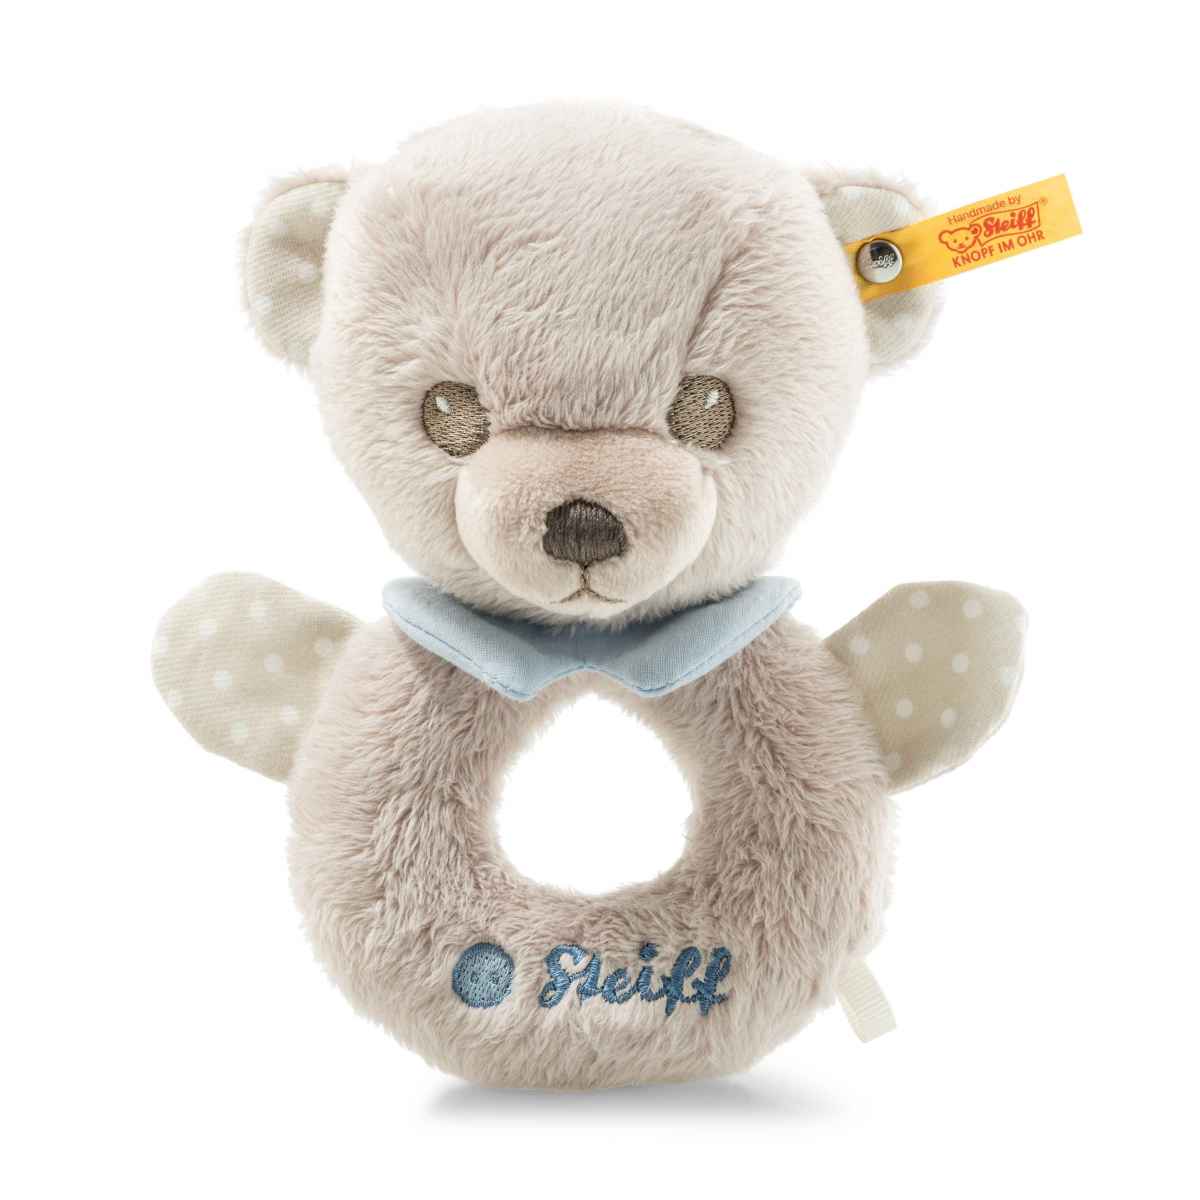 Погремушка Steiff Hello Baby Levi Teddy bear grip toy with rattle in gift box Штайф Мишка lady soft gloves premium winter cycling gloves knitted warm windproof unisex gloves with anti slip grip touch screen